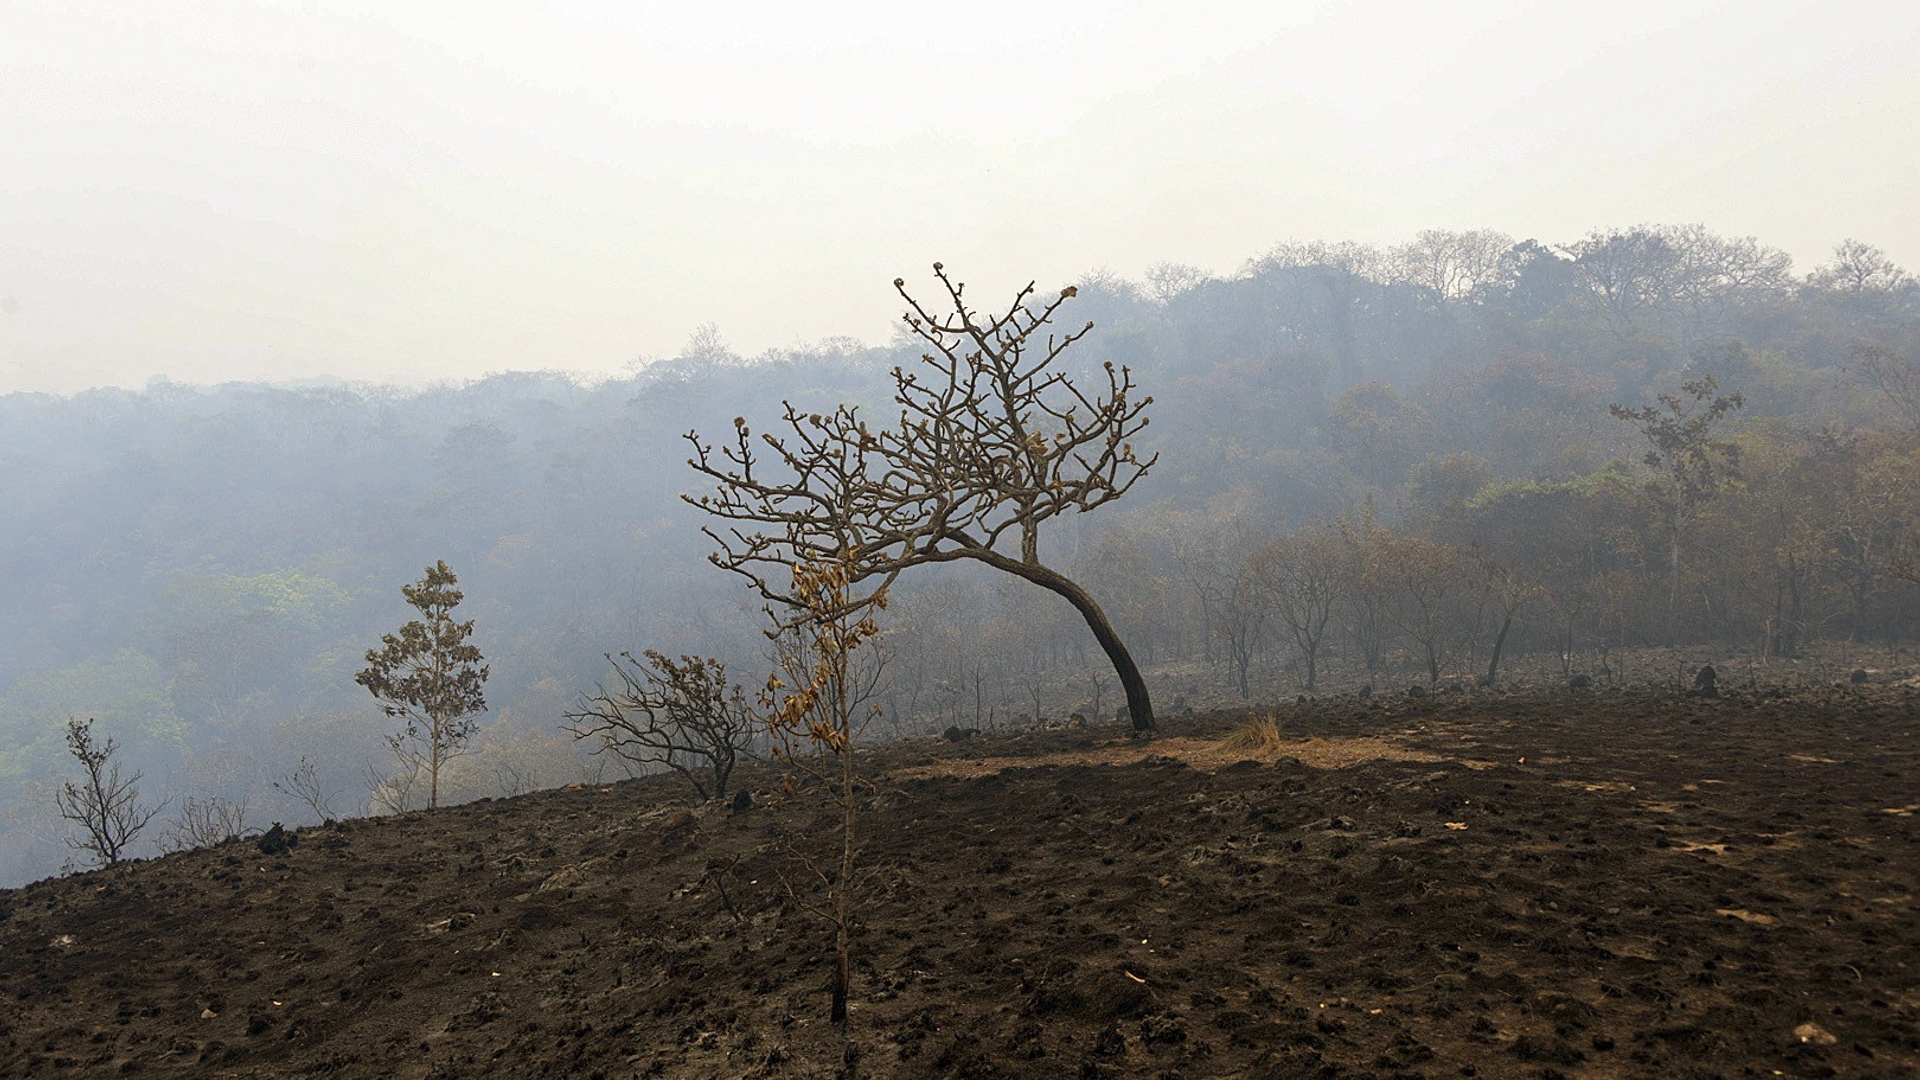 Forest fires do not diminish in the Brazilian Pantanal